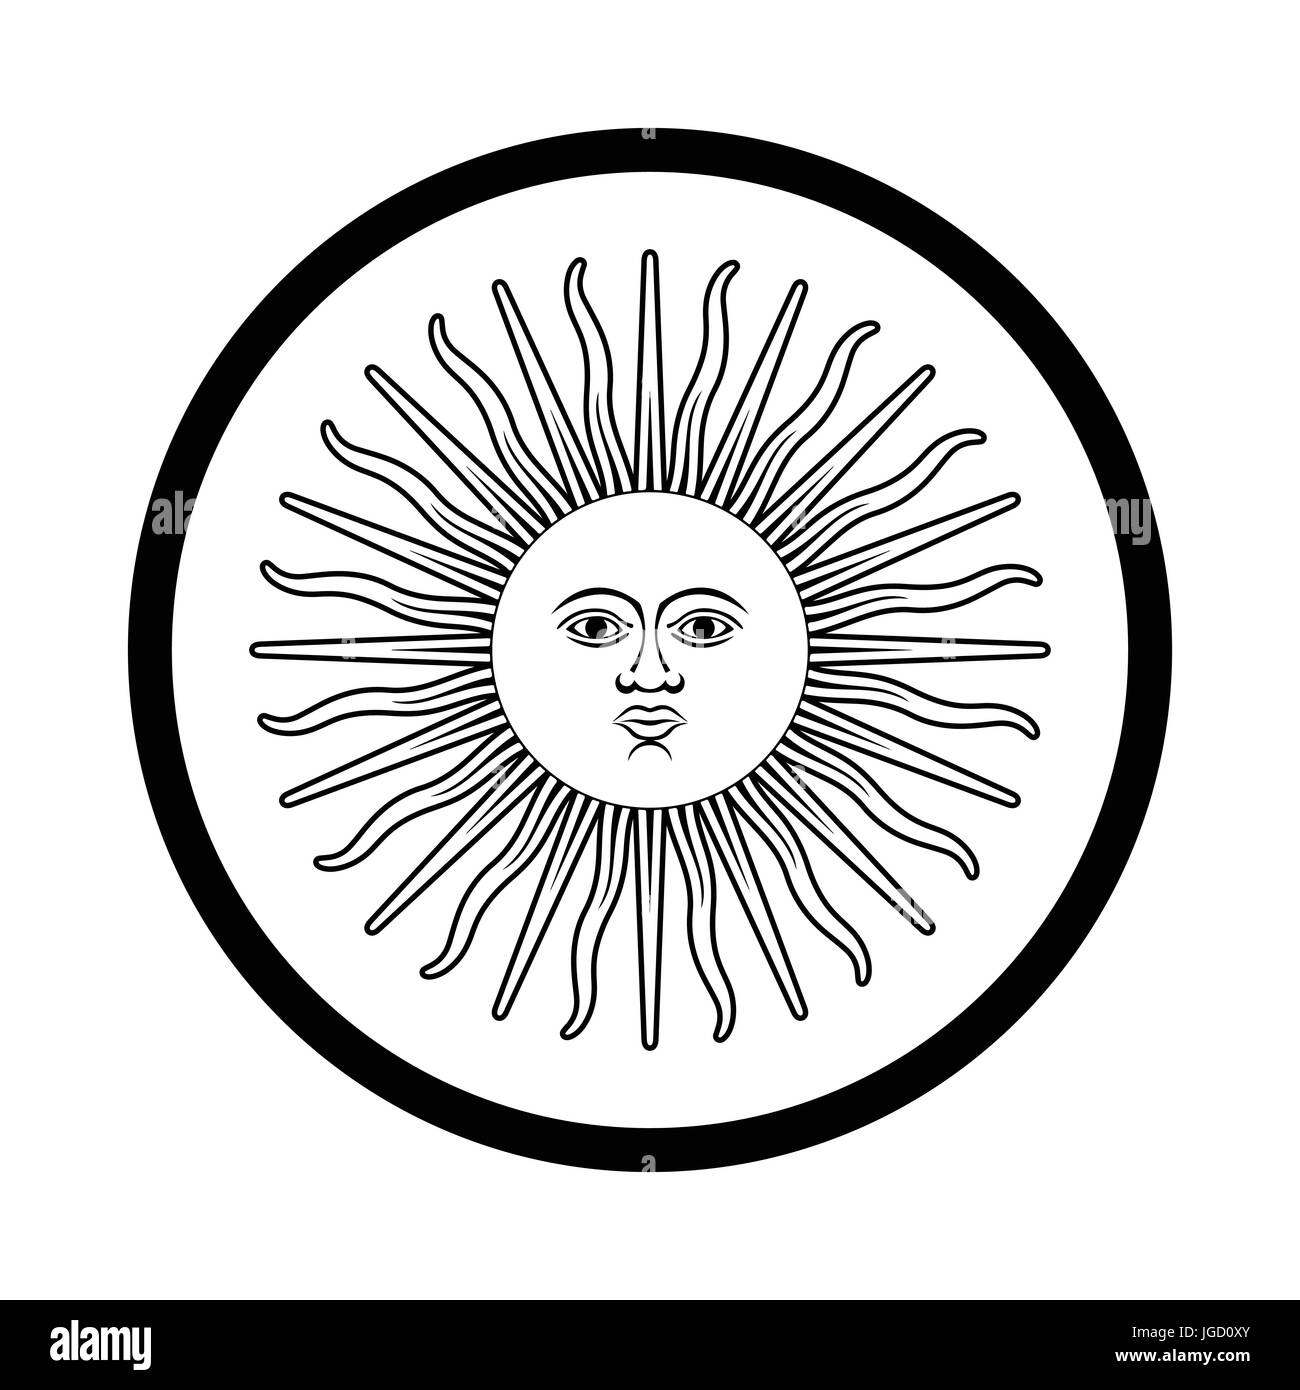 Symbol of Argentina icon, iconic symbol inside a circle, on white background. Vector Iconic Design. Stock Vector